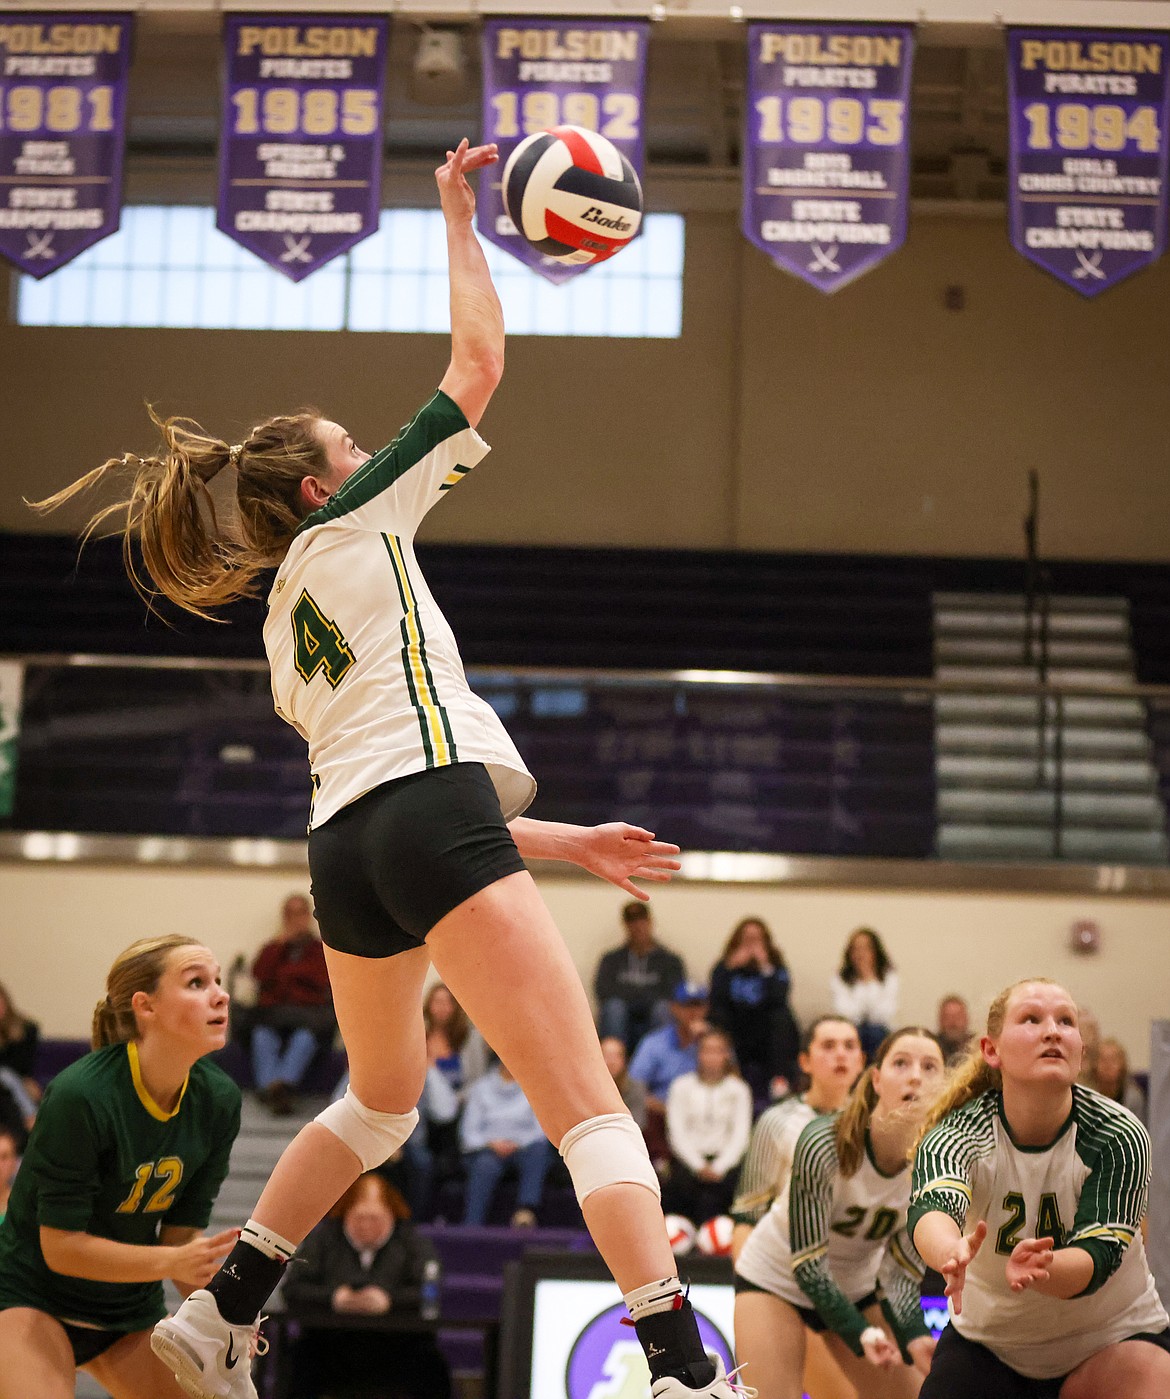 Myli Ridgeway flies high to make a play during action at the Western A Divisional Volleyball Tournament in Polson Thursday. (Jeremy Weber/Bigfork Eagle)